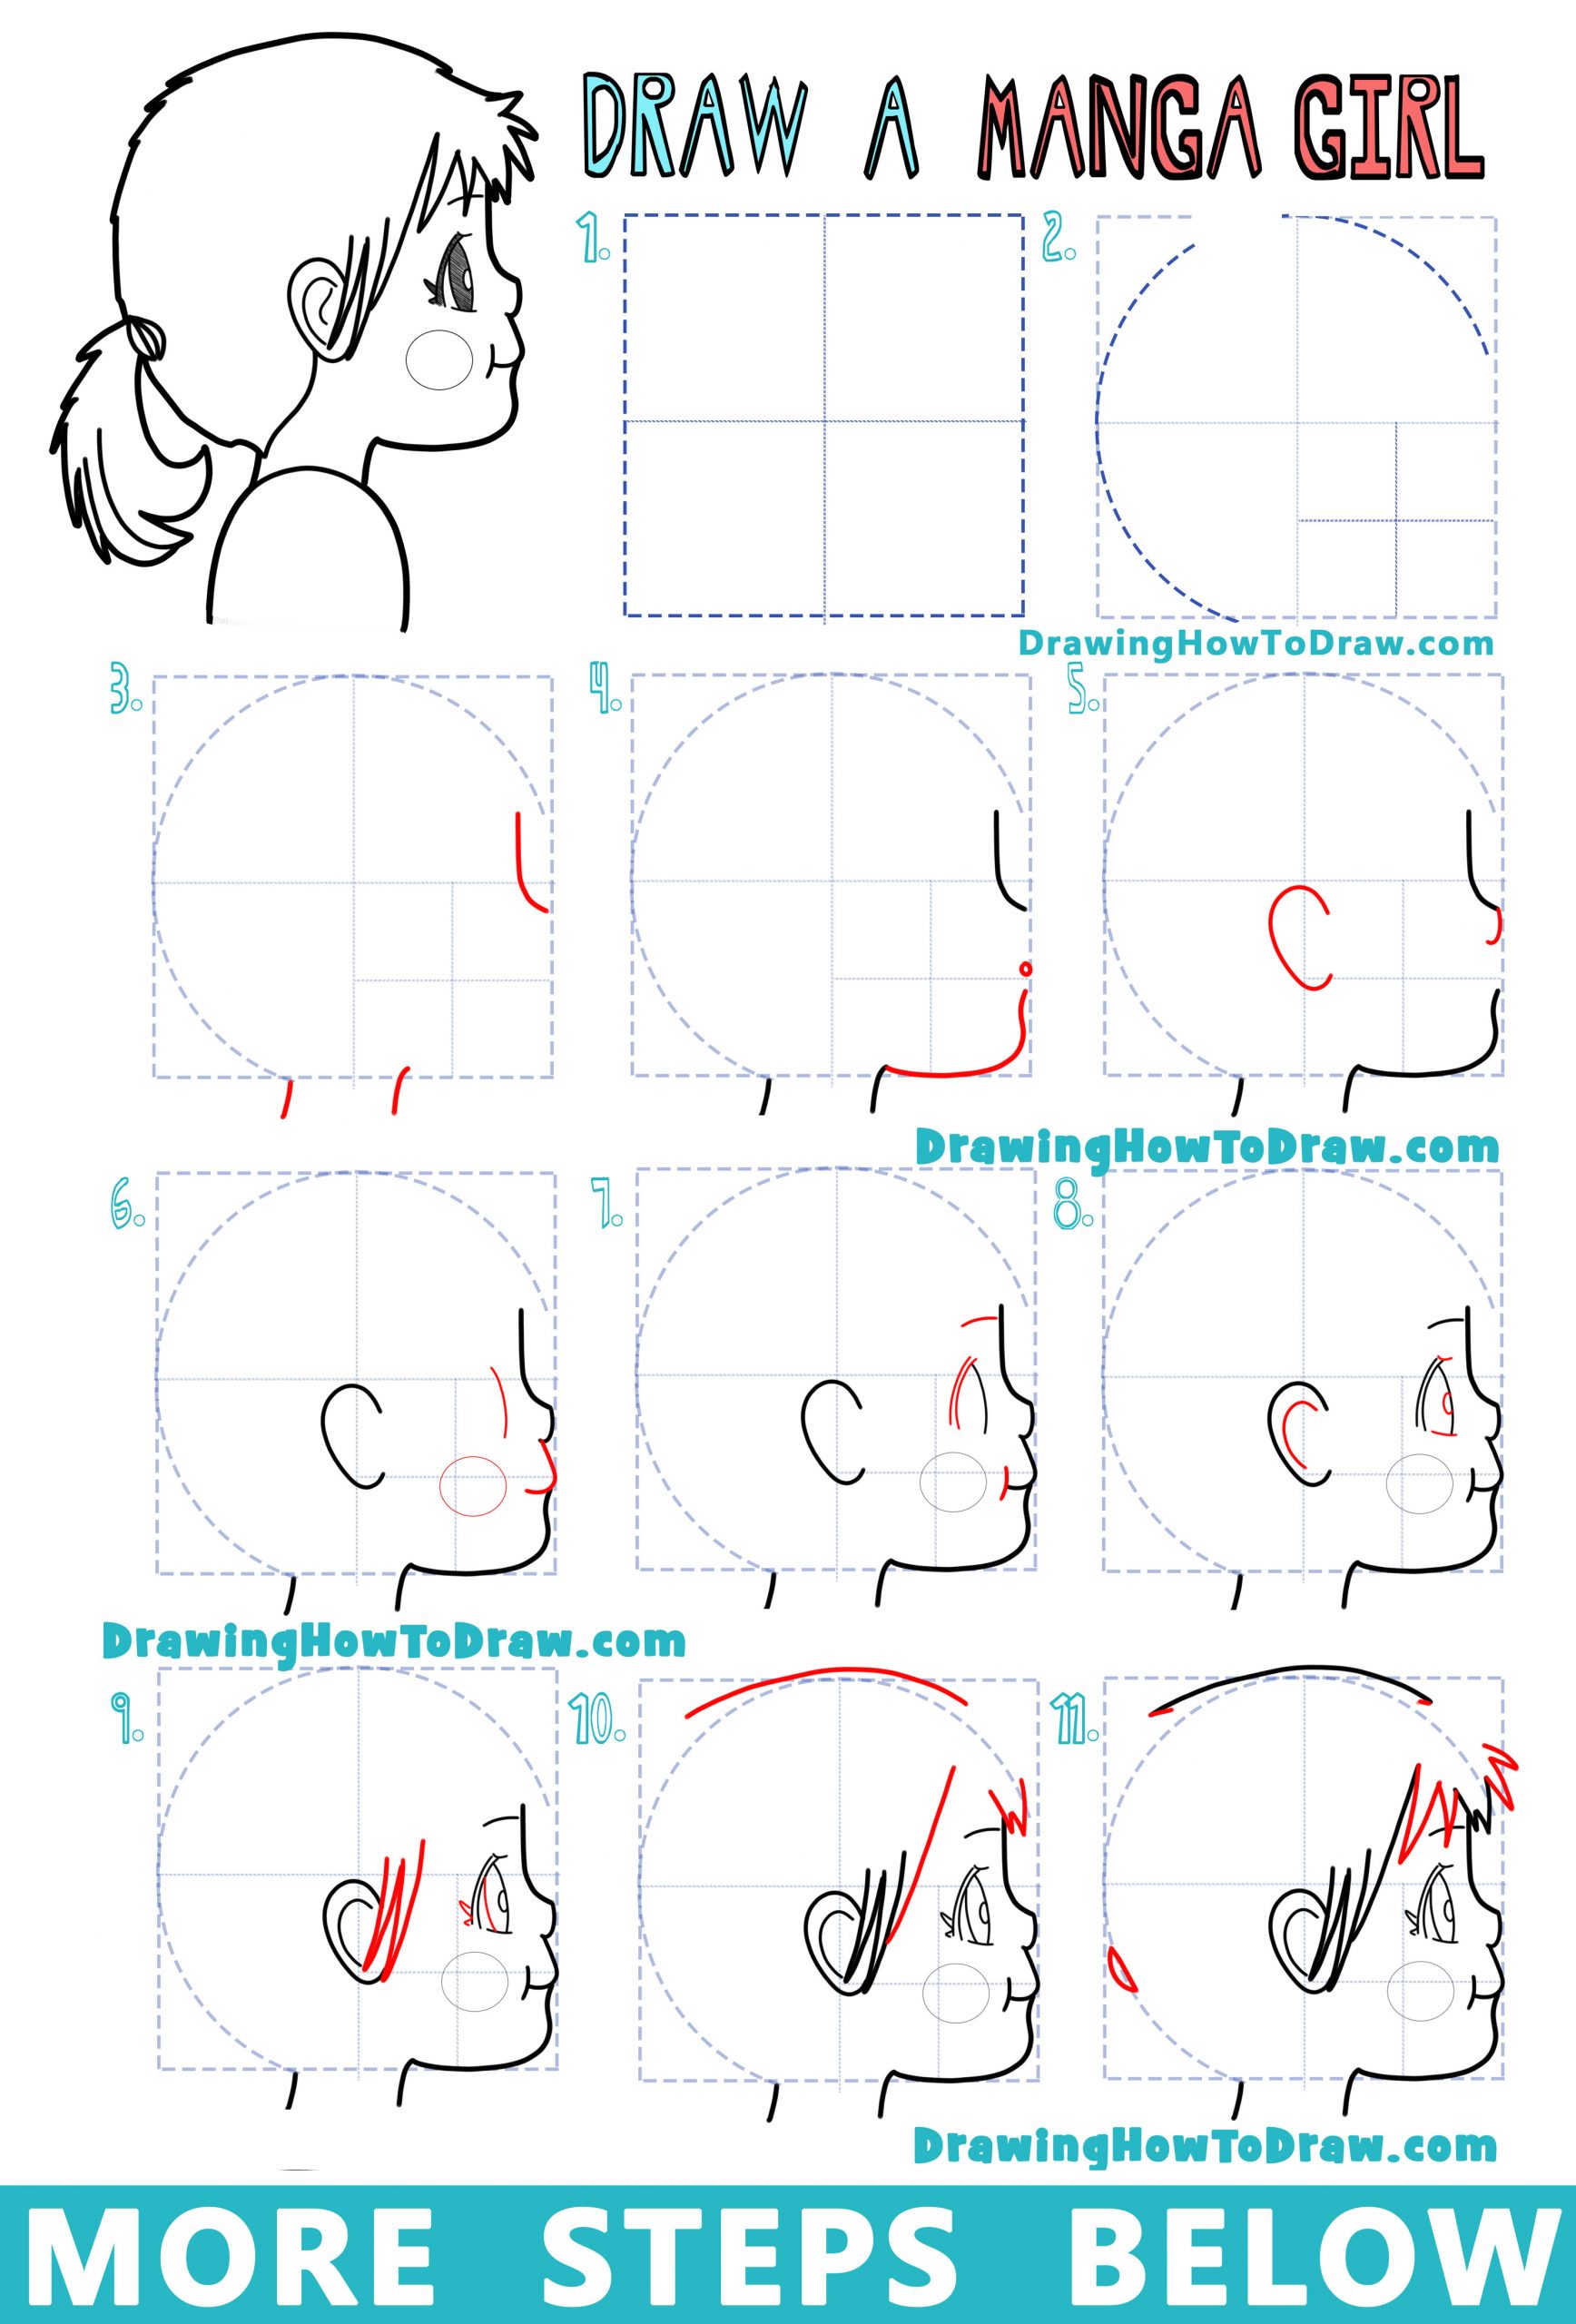 How to Draw an Anime / Manga Girl from The Side - Easy Step by Step Drawing Tutorial for Beginners